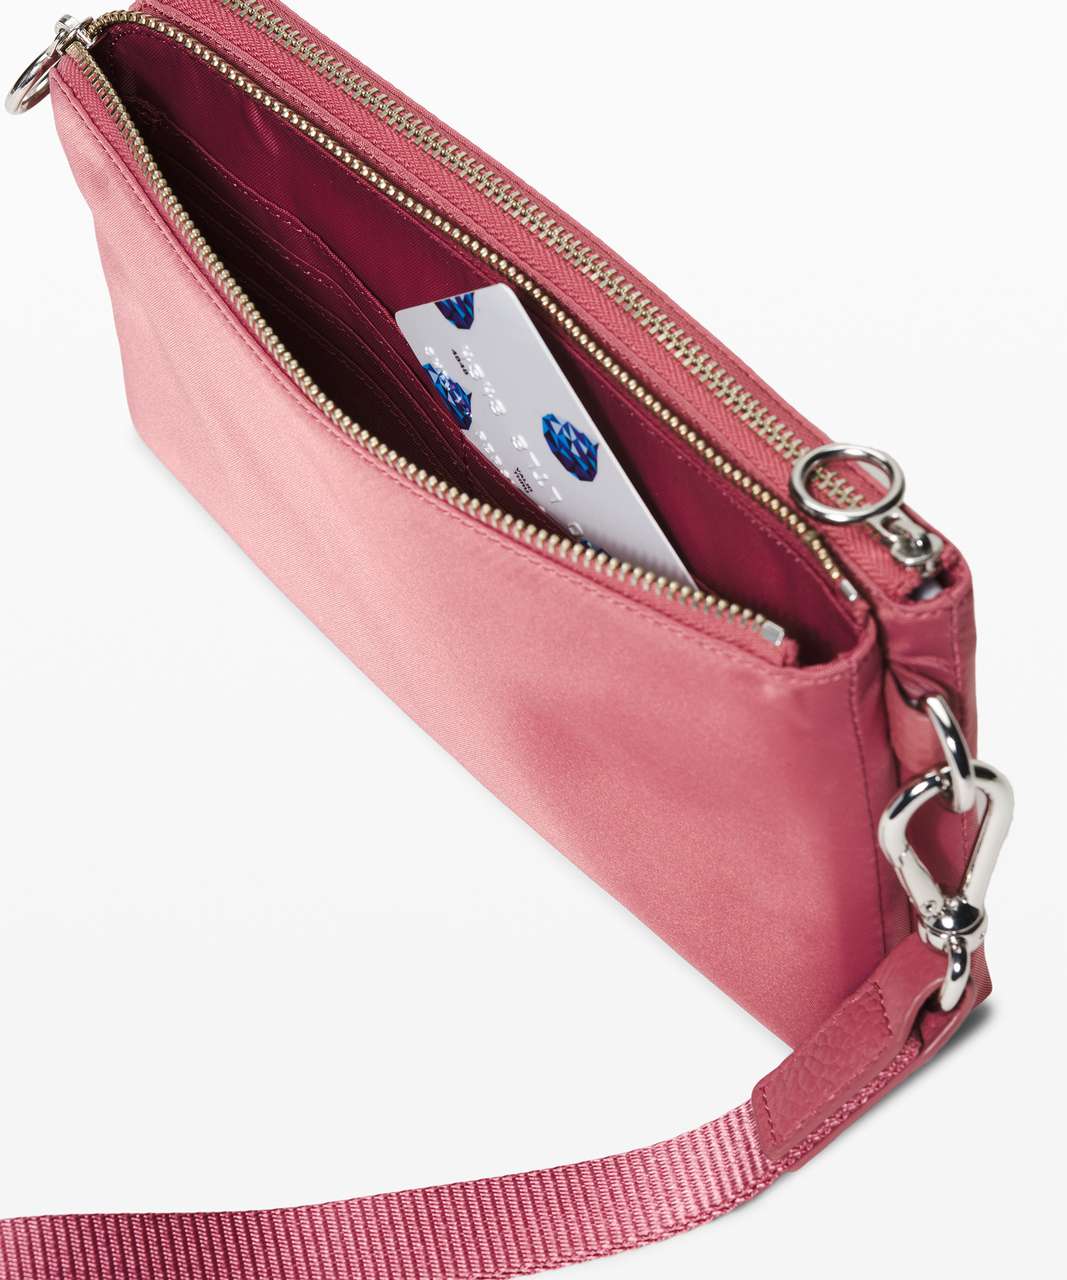 Lululemon Now and Always Pouch - Cherry Tint